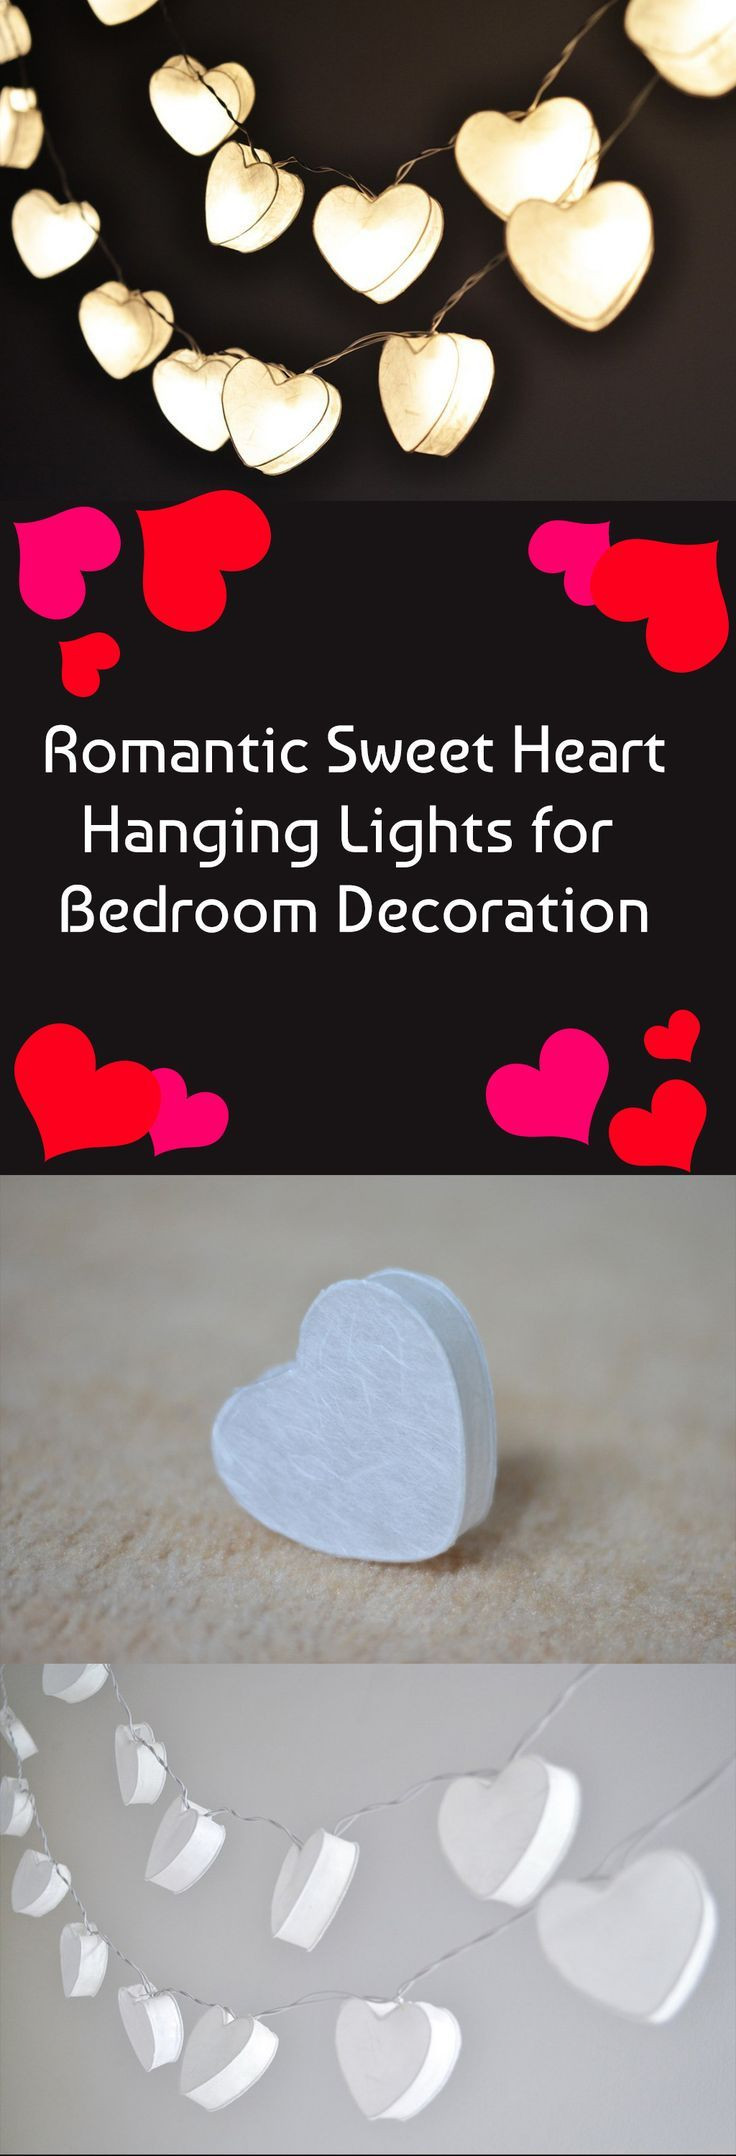 Cute Valentine Gift Ideas For Her
 Romantic Valentine s Gifts for Her 22 Cute Gifts She ll